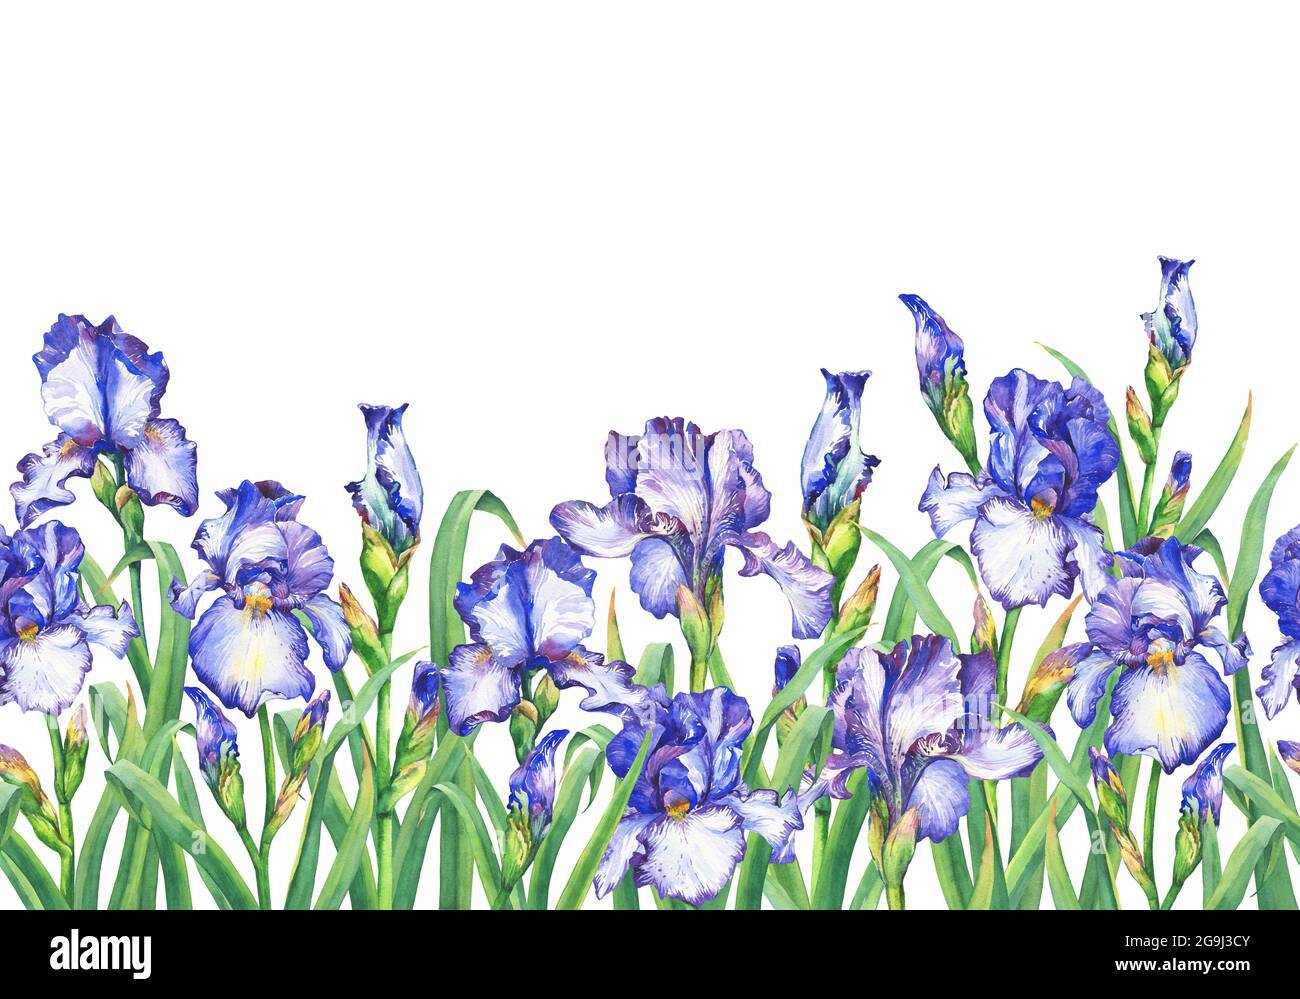 Floral seamless border with flowering violet irises, on white ...